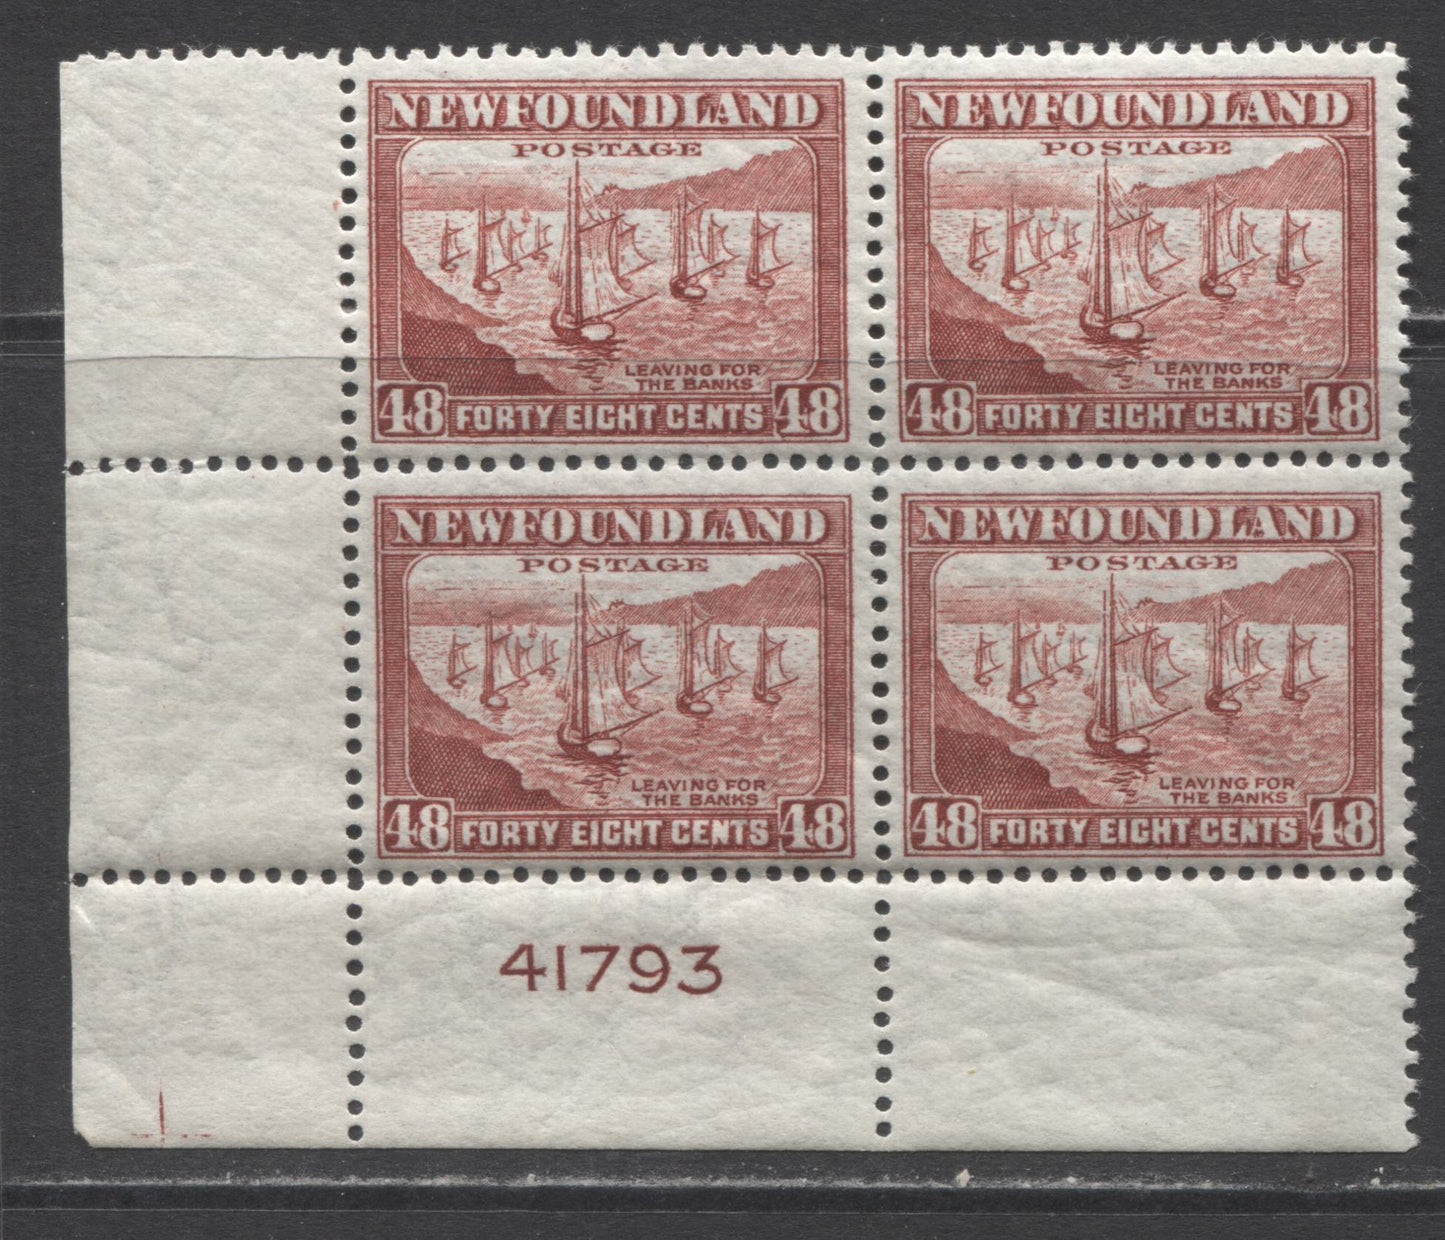 Lot 248 Newfoundland #266 48c Red Brown Fishing Fleet, 1941-1944 Resources Re-Issue, A VFNH LL Plate 41793 Block Of 4